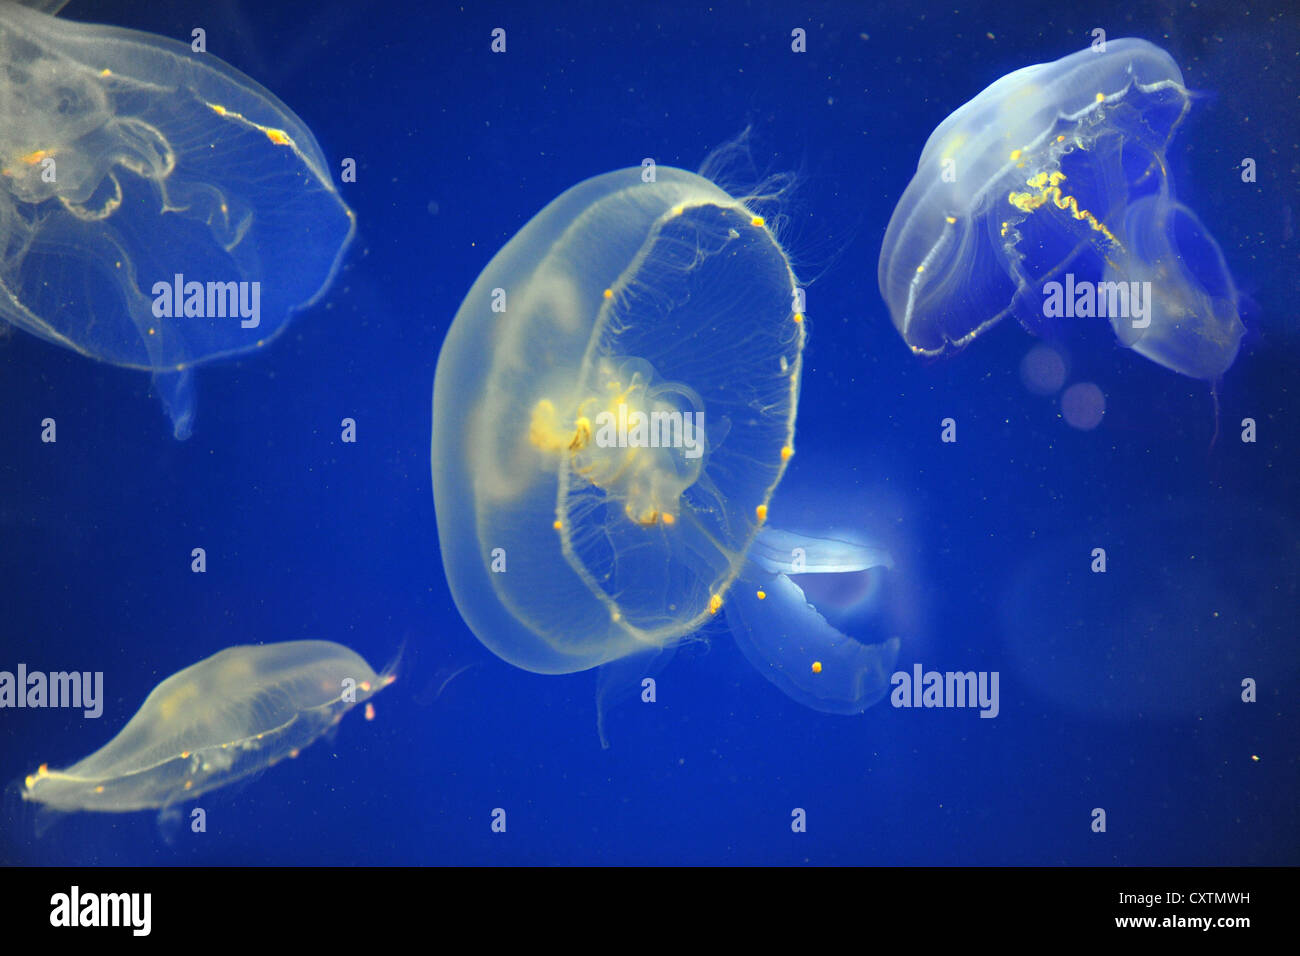 School of moon jellyfish against blue background Stock Photo